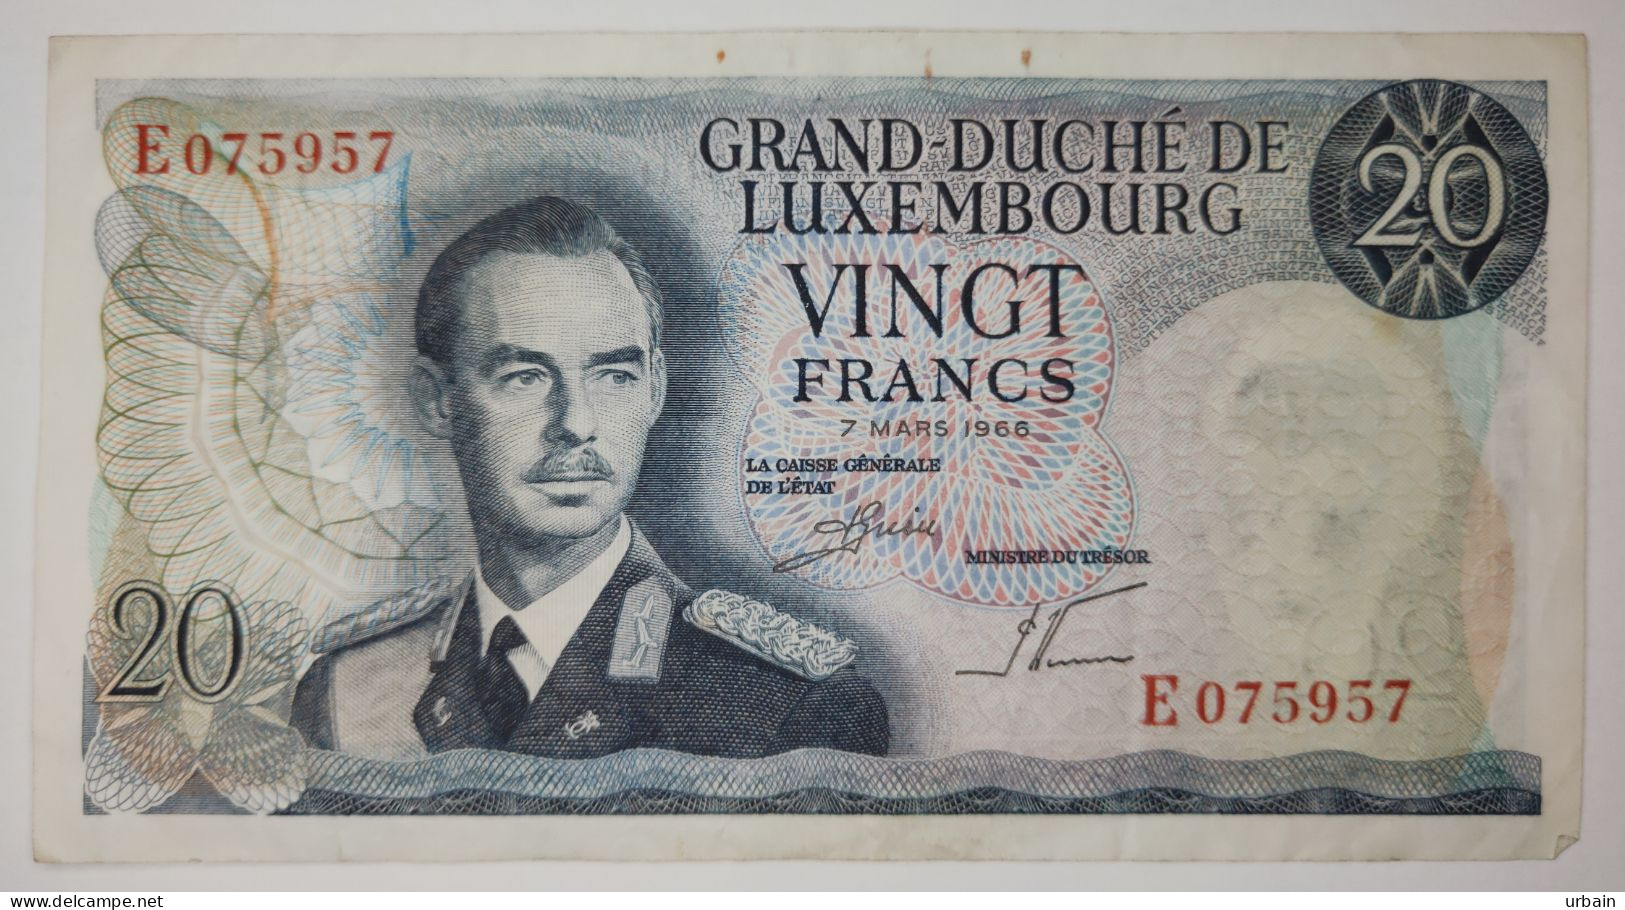 Batch of 5 banknotes - Luxembourg - 20 francs - 7 mars 1966